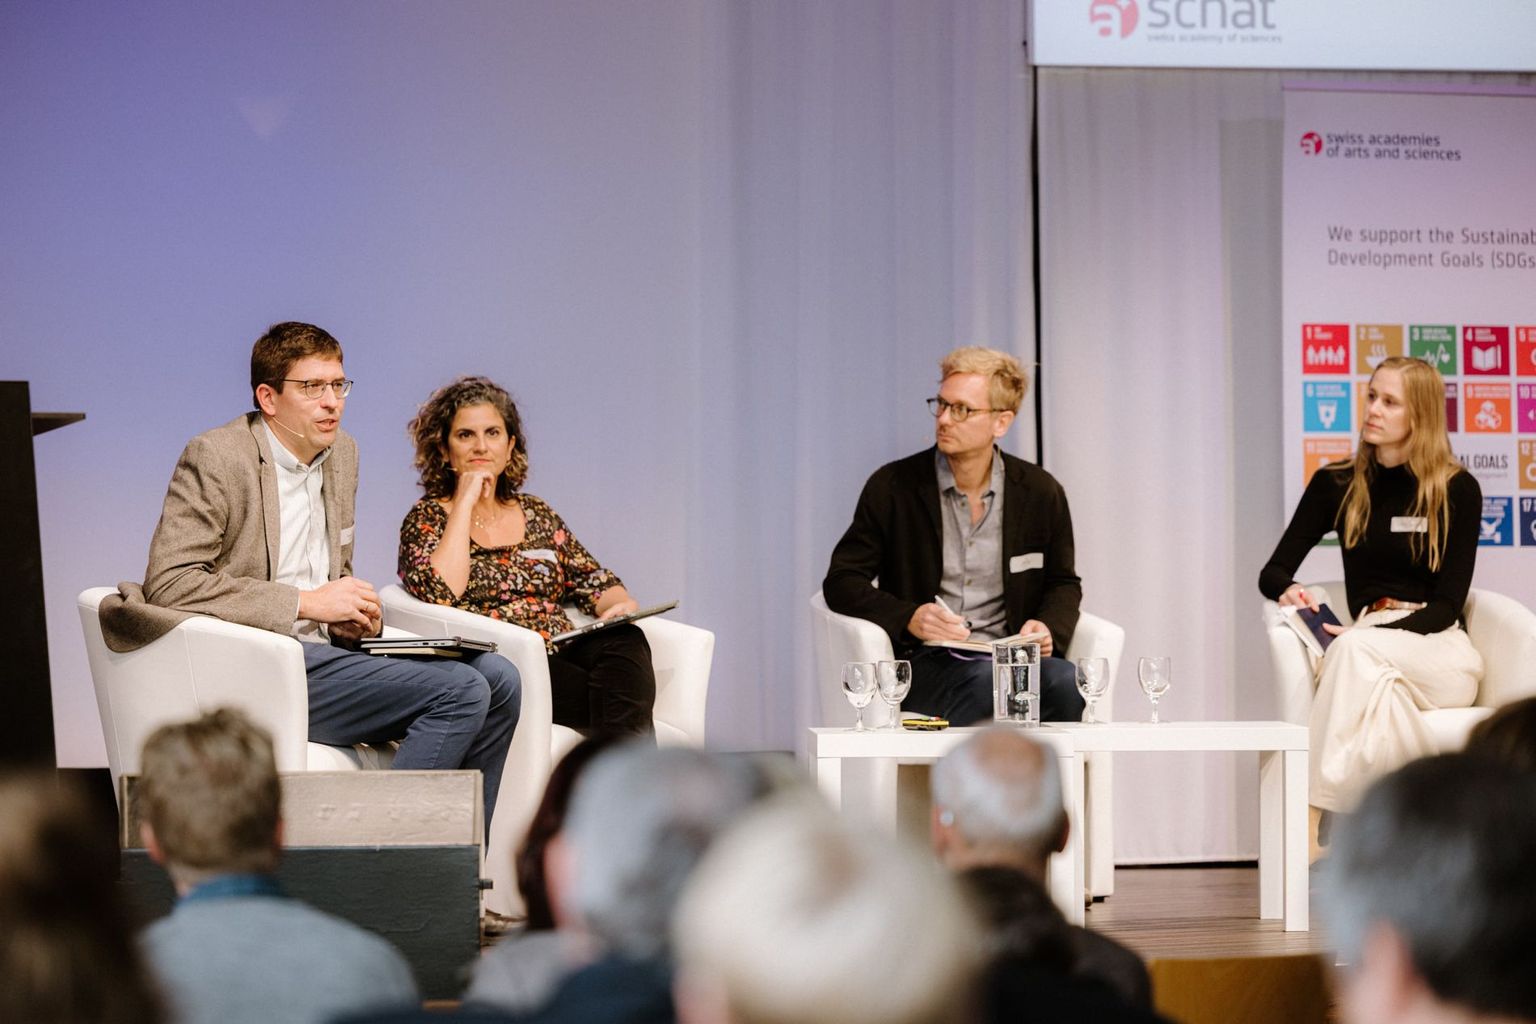 Sustainability Science Forum 2022: Panel discussion with Moderator: Clemens Mader, Empa & OST, Marlyne Sahakian, University of Geneva, Philip Balsiger, University of Neuchâtel and Eva-Maria Spreitzer, University of Lausanne